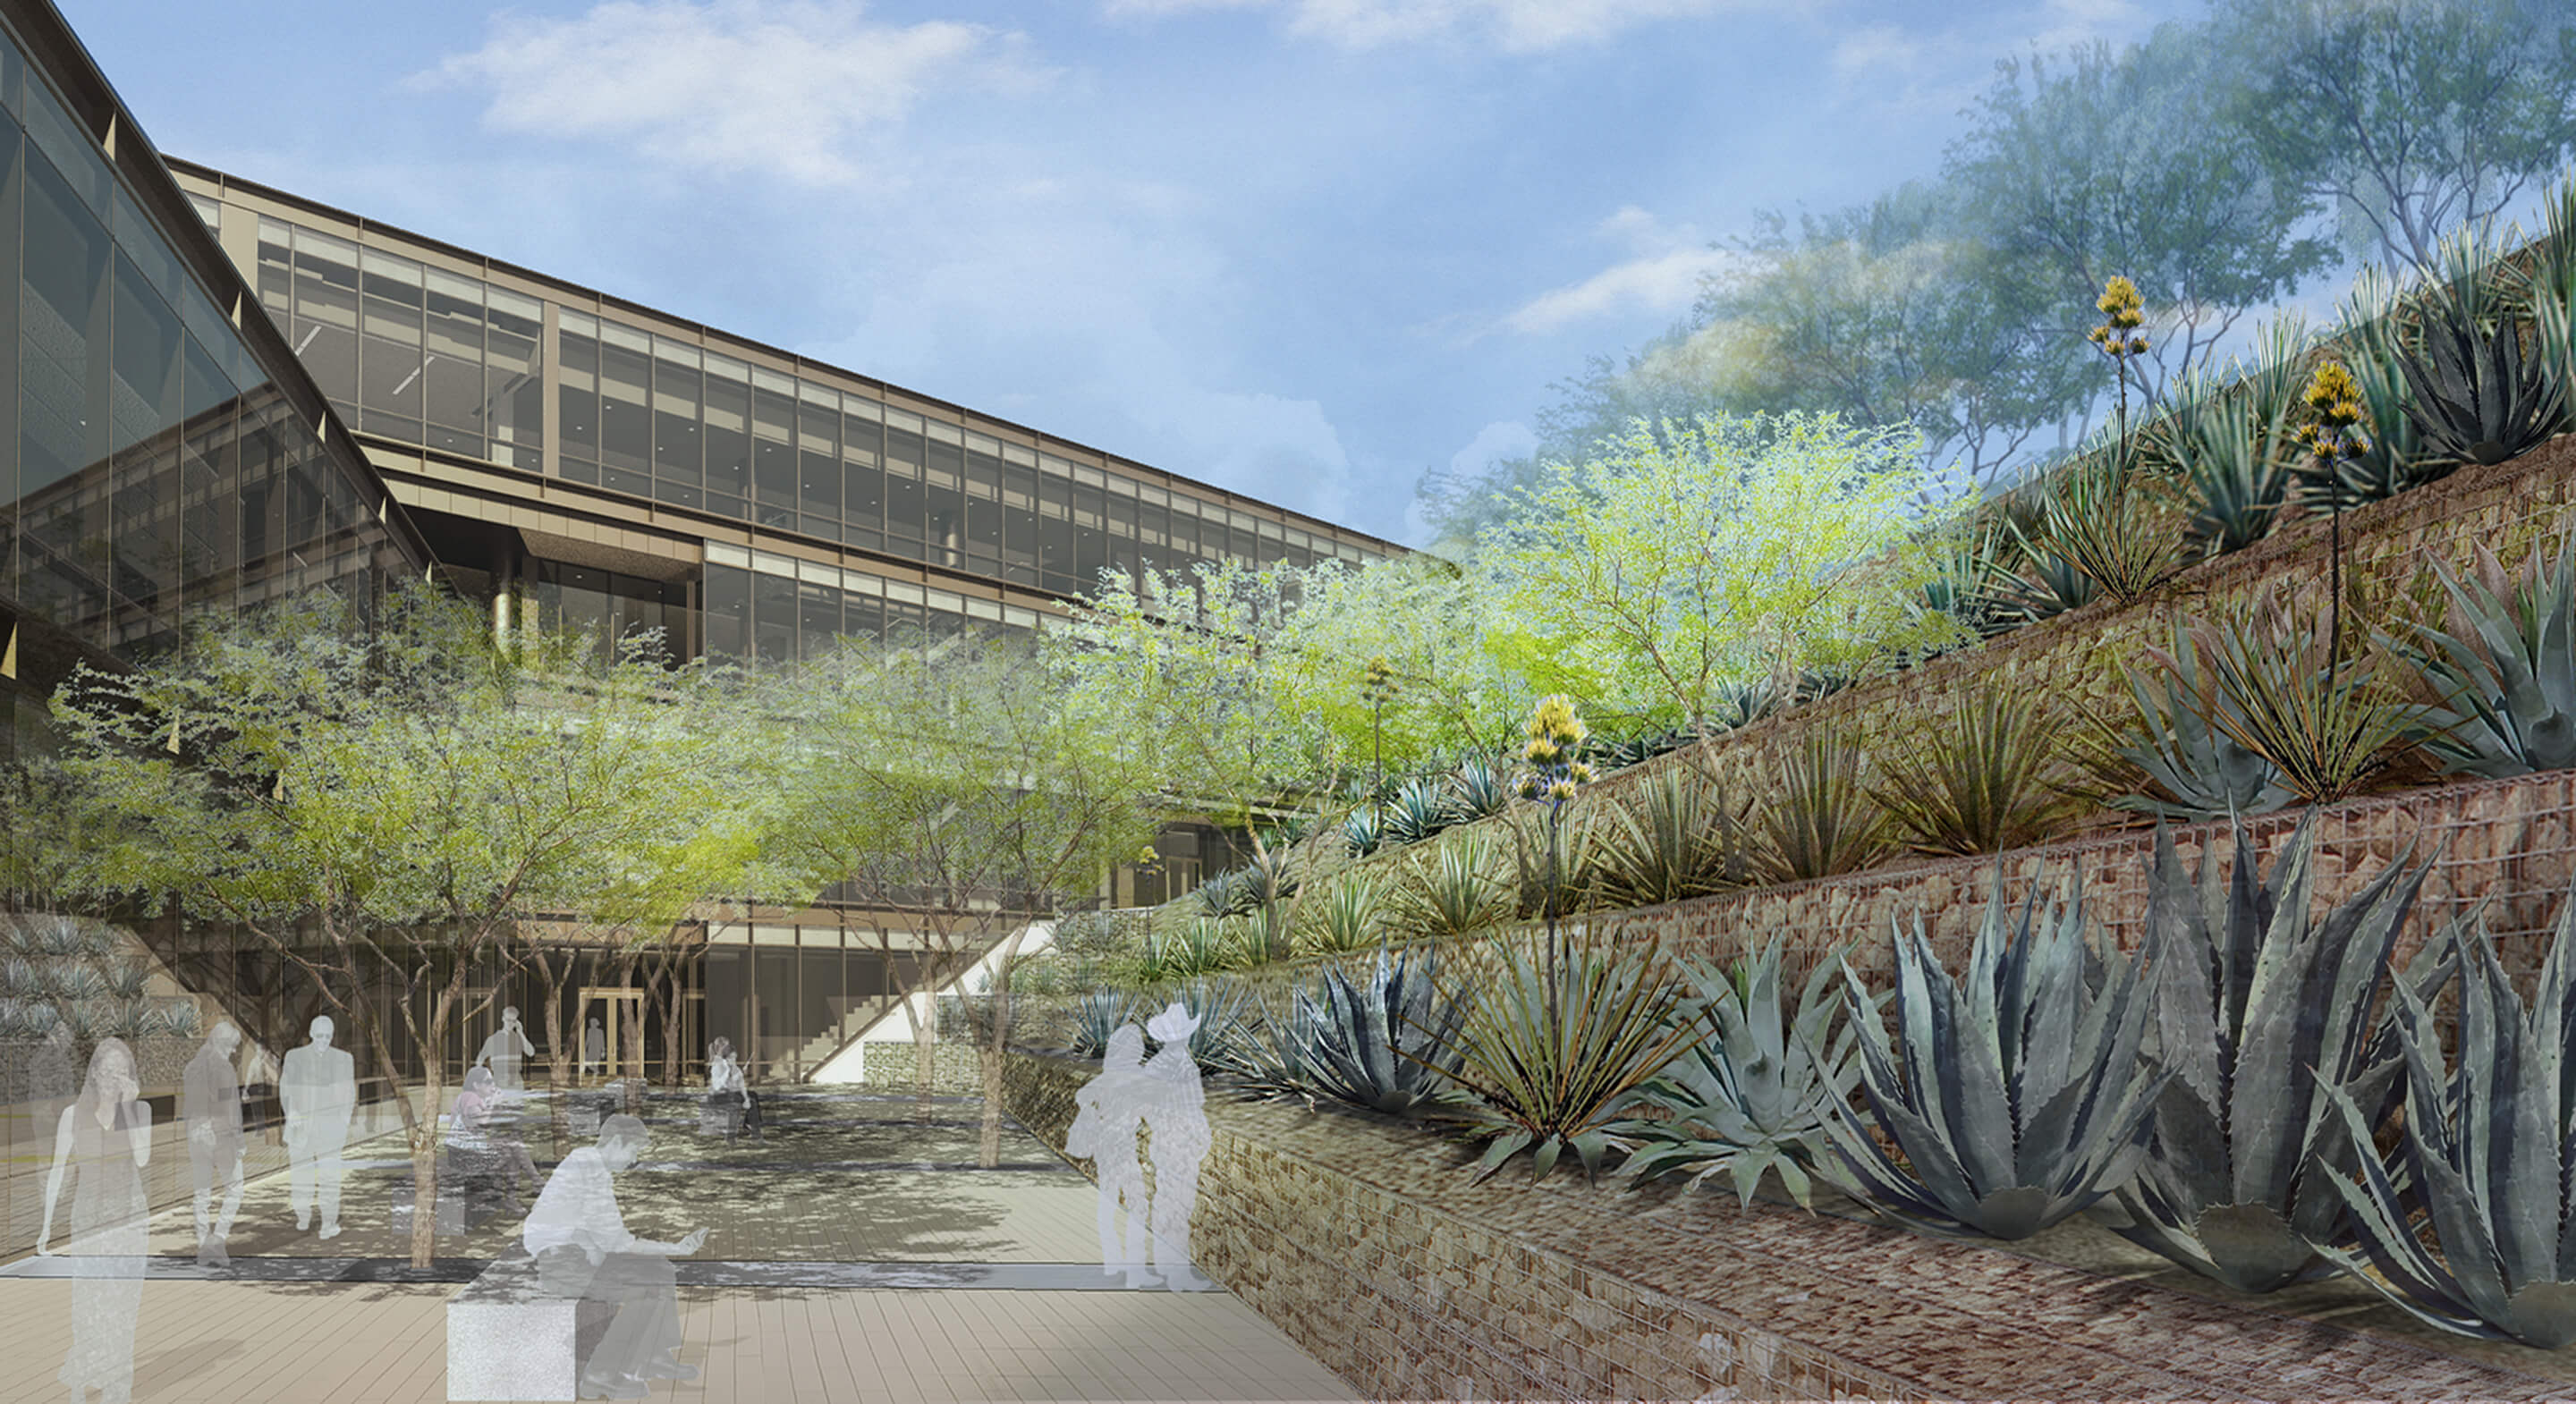 Architectural rendering of a new U.S. port of entry designed by Perkins&Will architects.